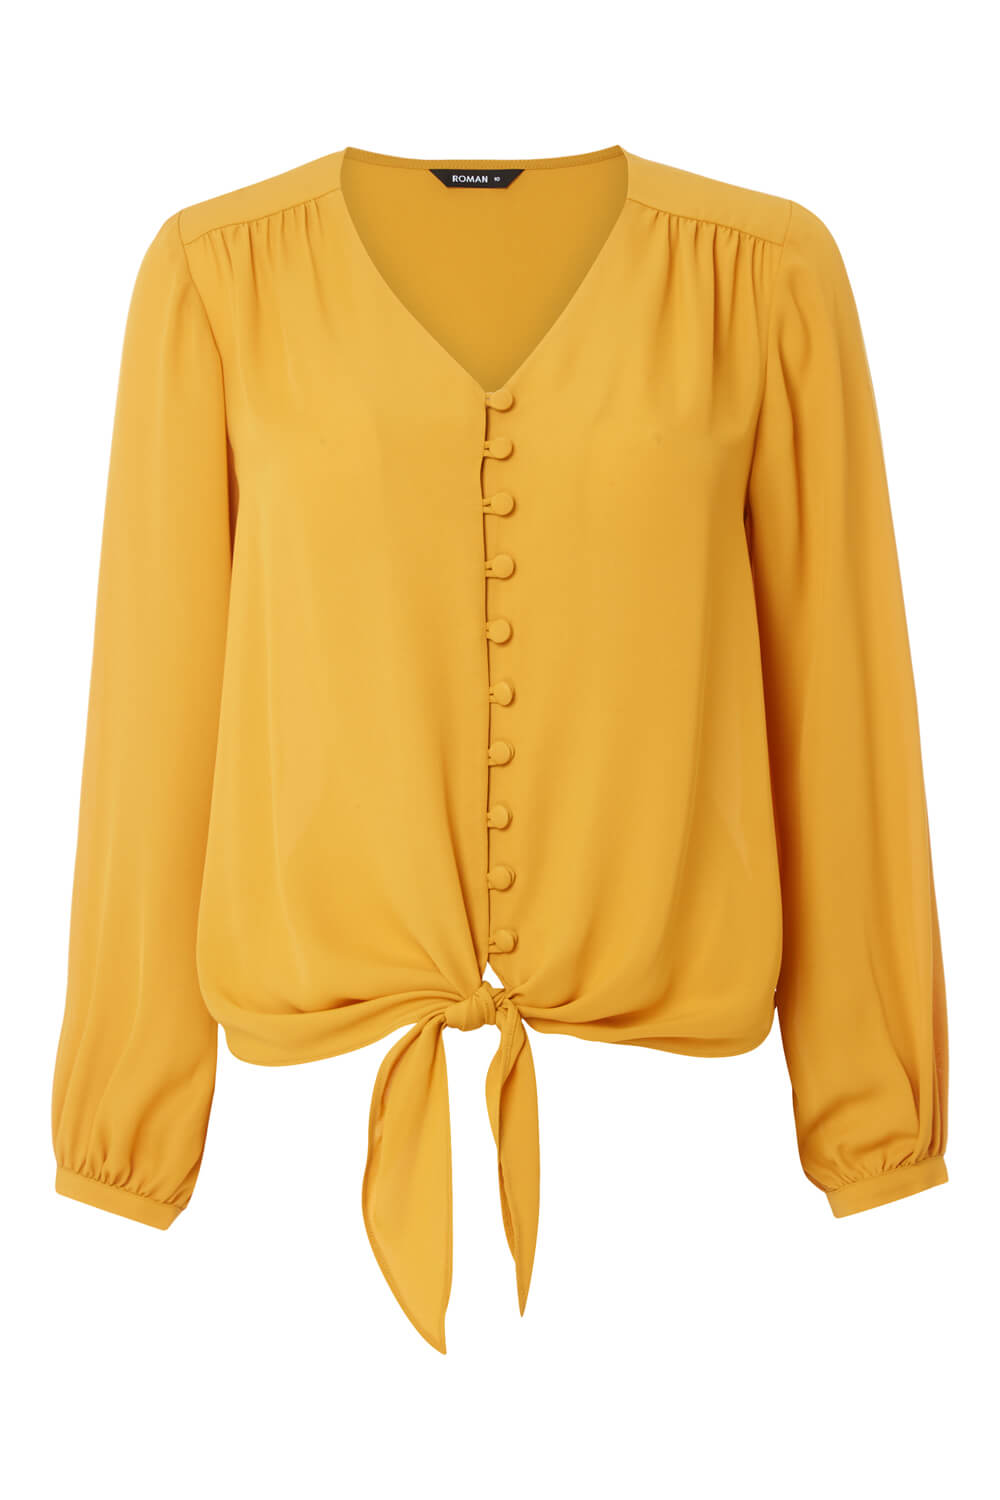 Mustard Button Tie Front Blouse, Image 4 of 4